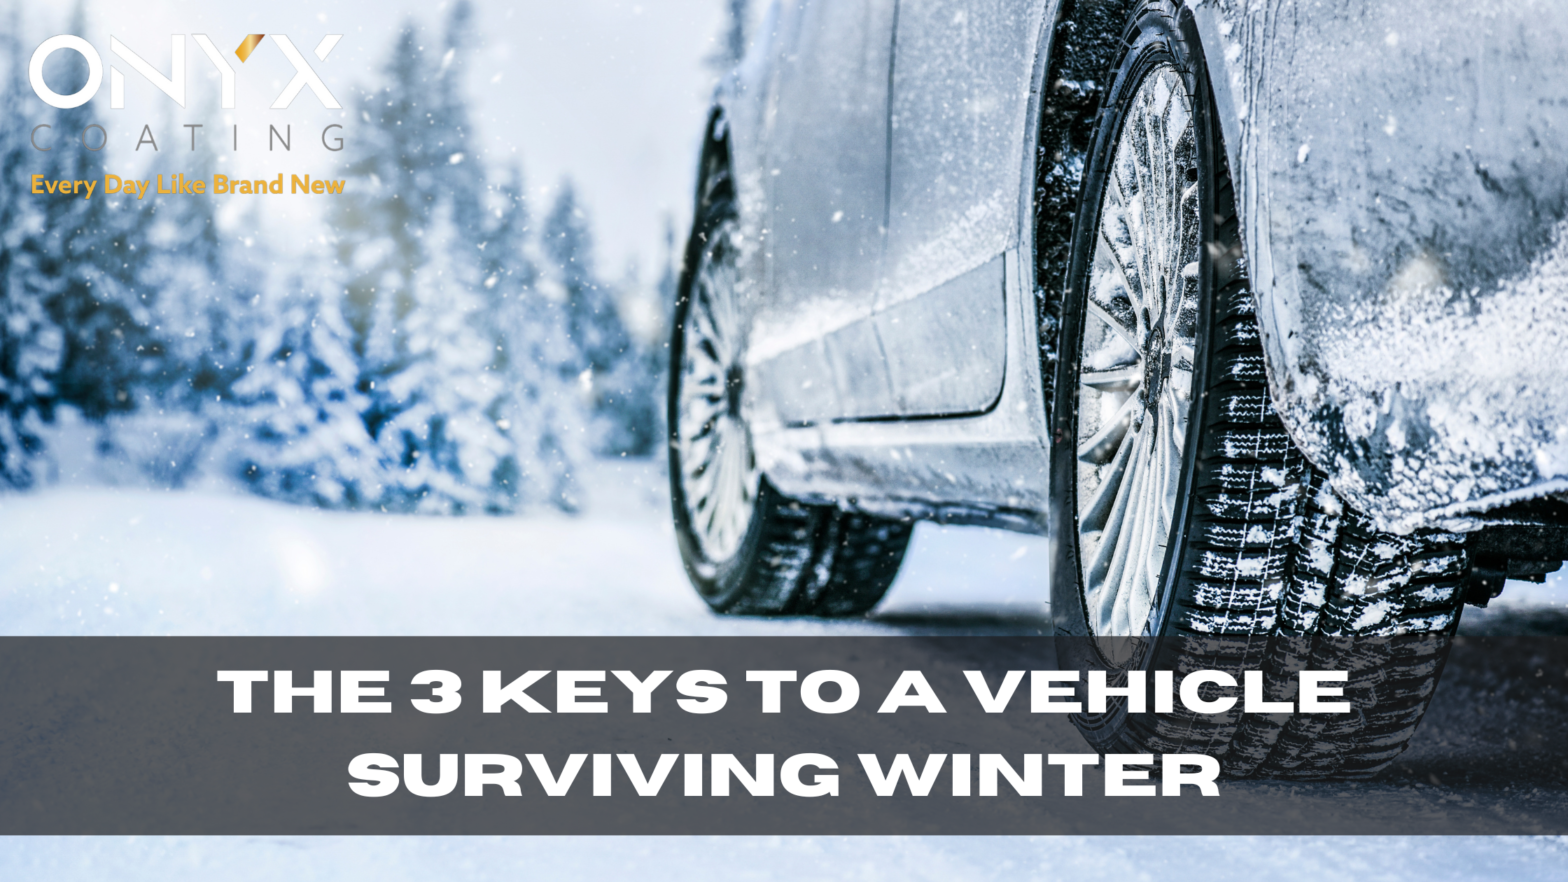 The 3 keys to a vehicle surviving winter